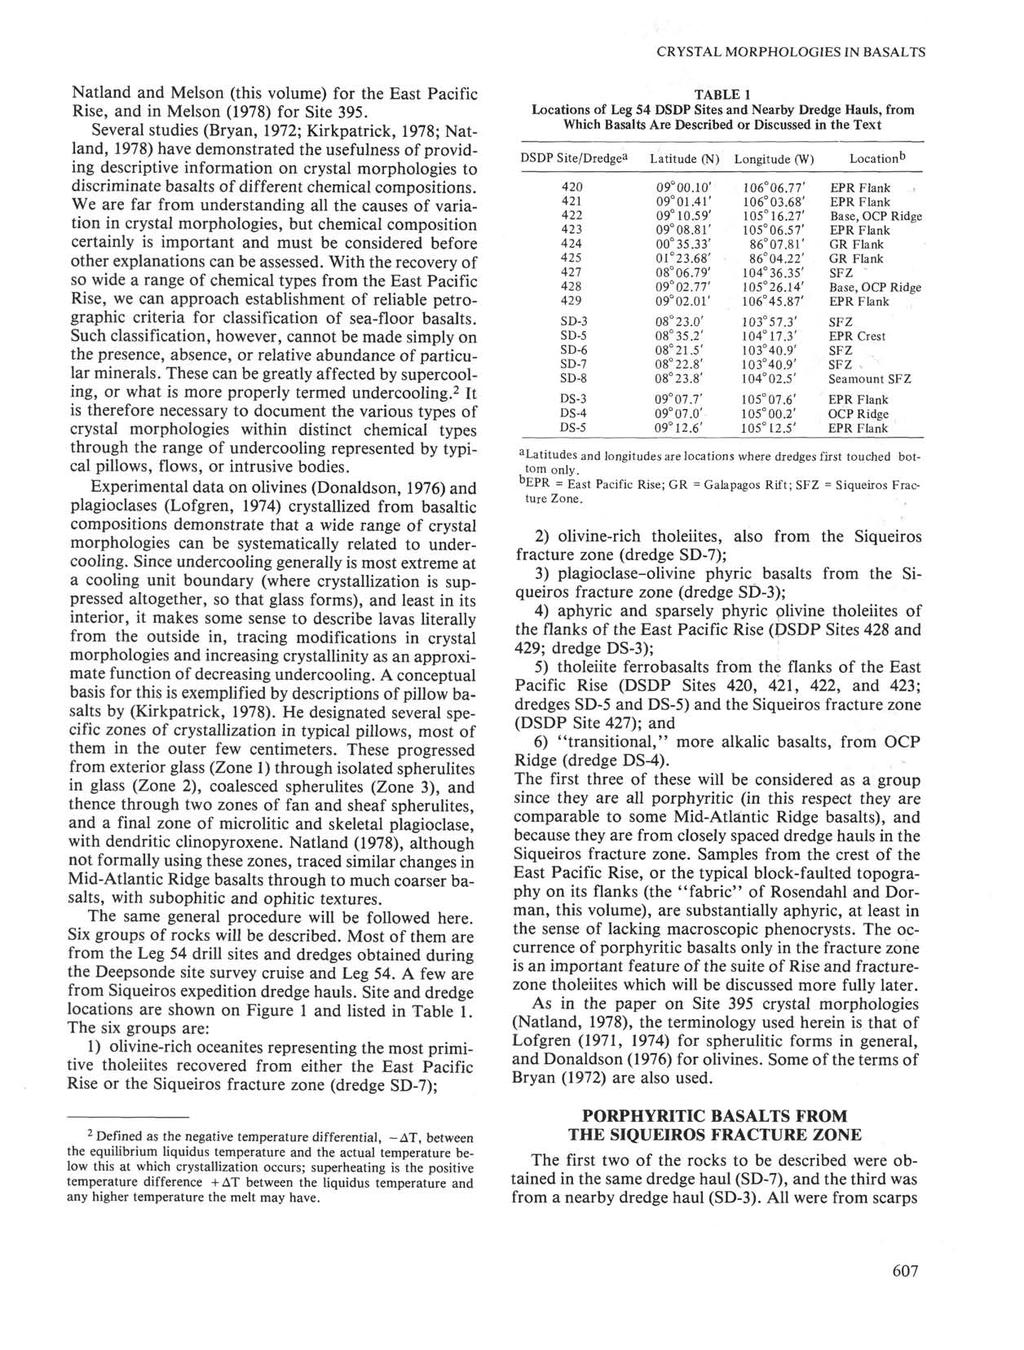 CRYSTAL MORPHOLOGIES IN BASALTS Natland and Melson (this volume) for the East Pacific Rise, and in Melson (1978) for Site 395.